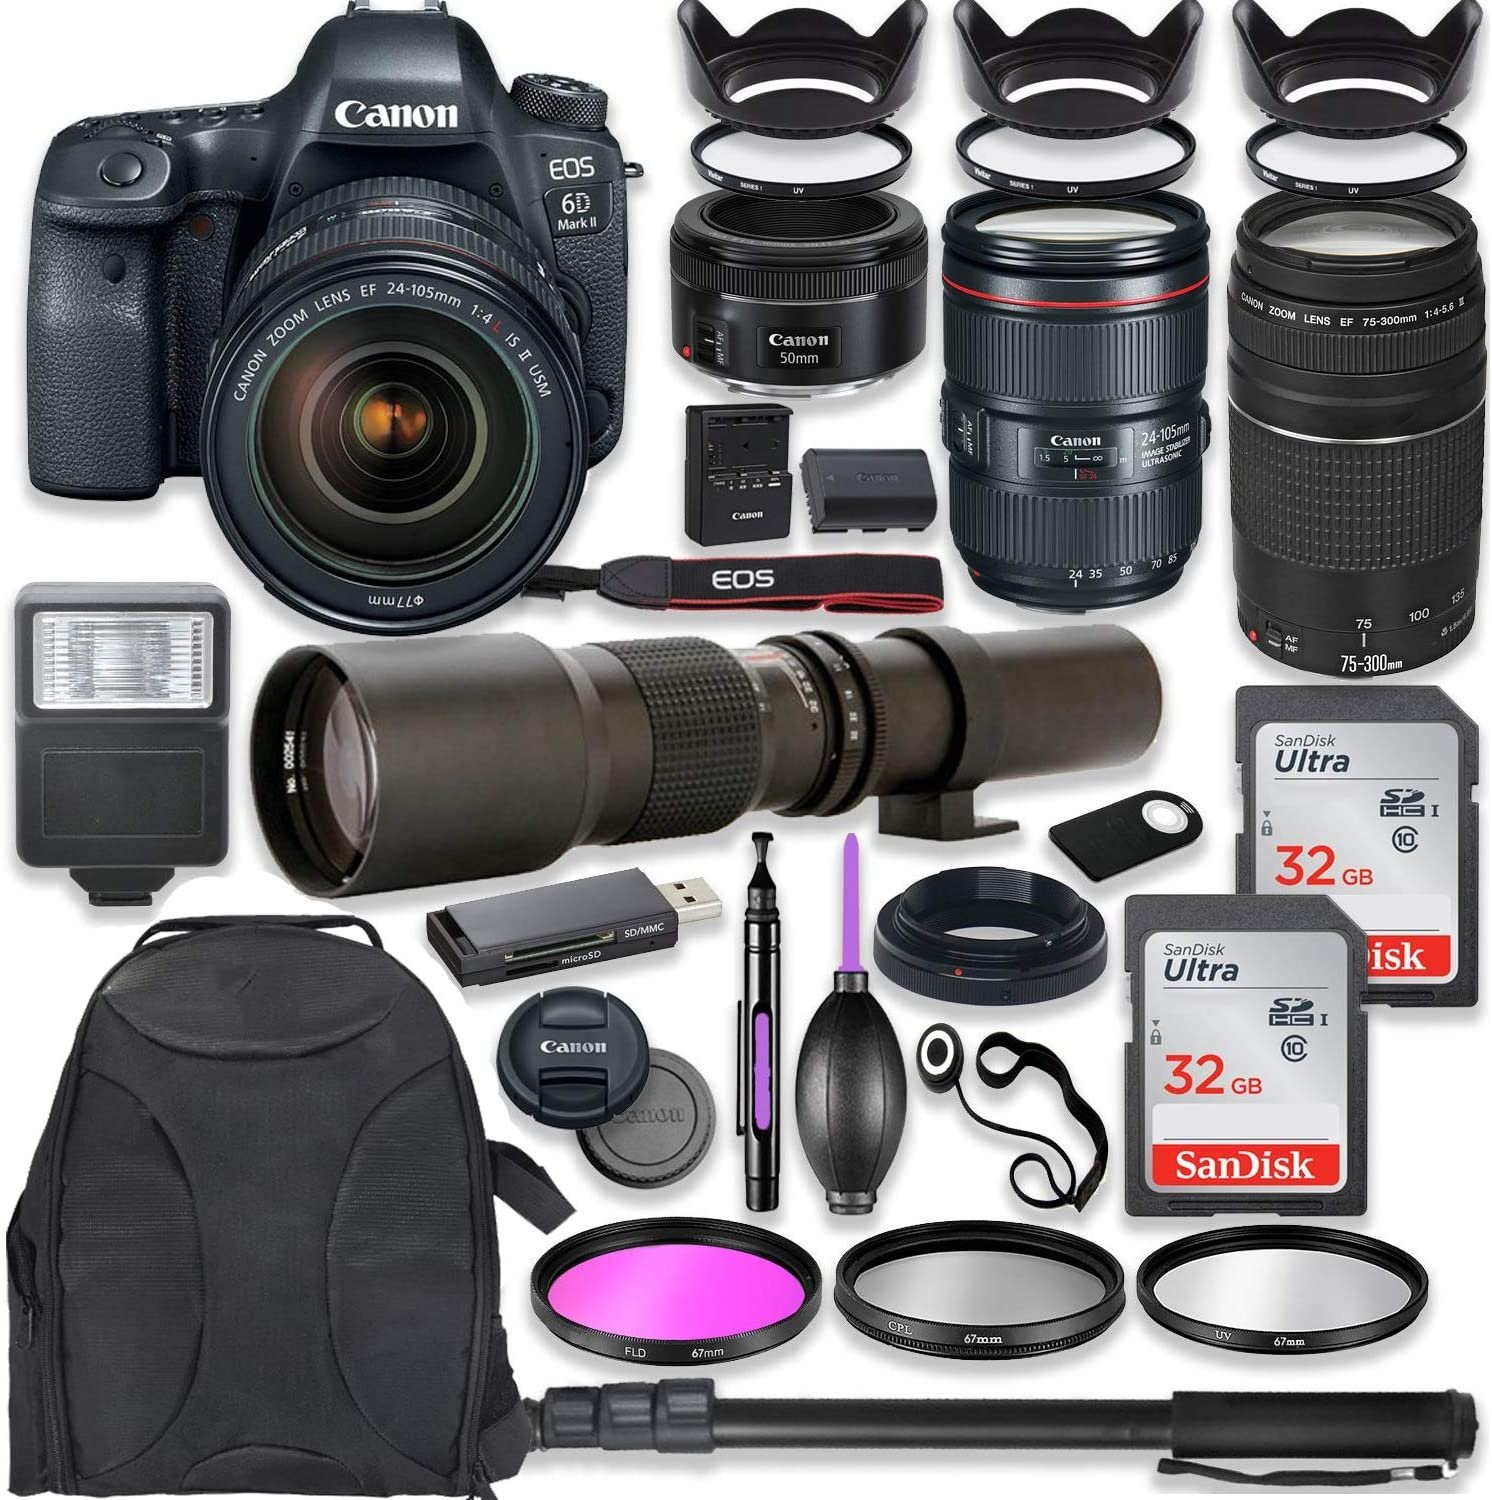 Canon EOS 6D Mark II DSLR Camera w/ 24-105mm USM Lens Bundle + Canon EF 75-300mm III Lens, Canon 50mm f/1.8 and 500mm Preset Lens + Deluxe Backpack + 64GB Memory + Monopod + Professional Bundle - image 1 of 9